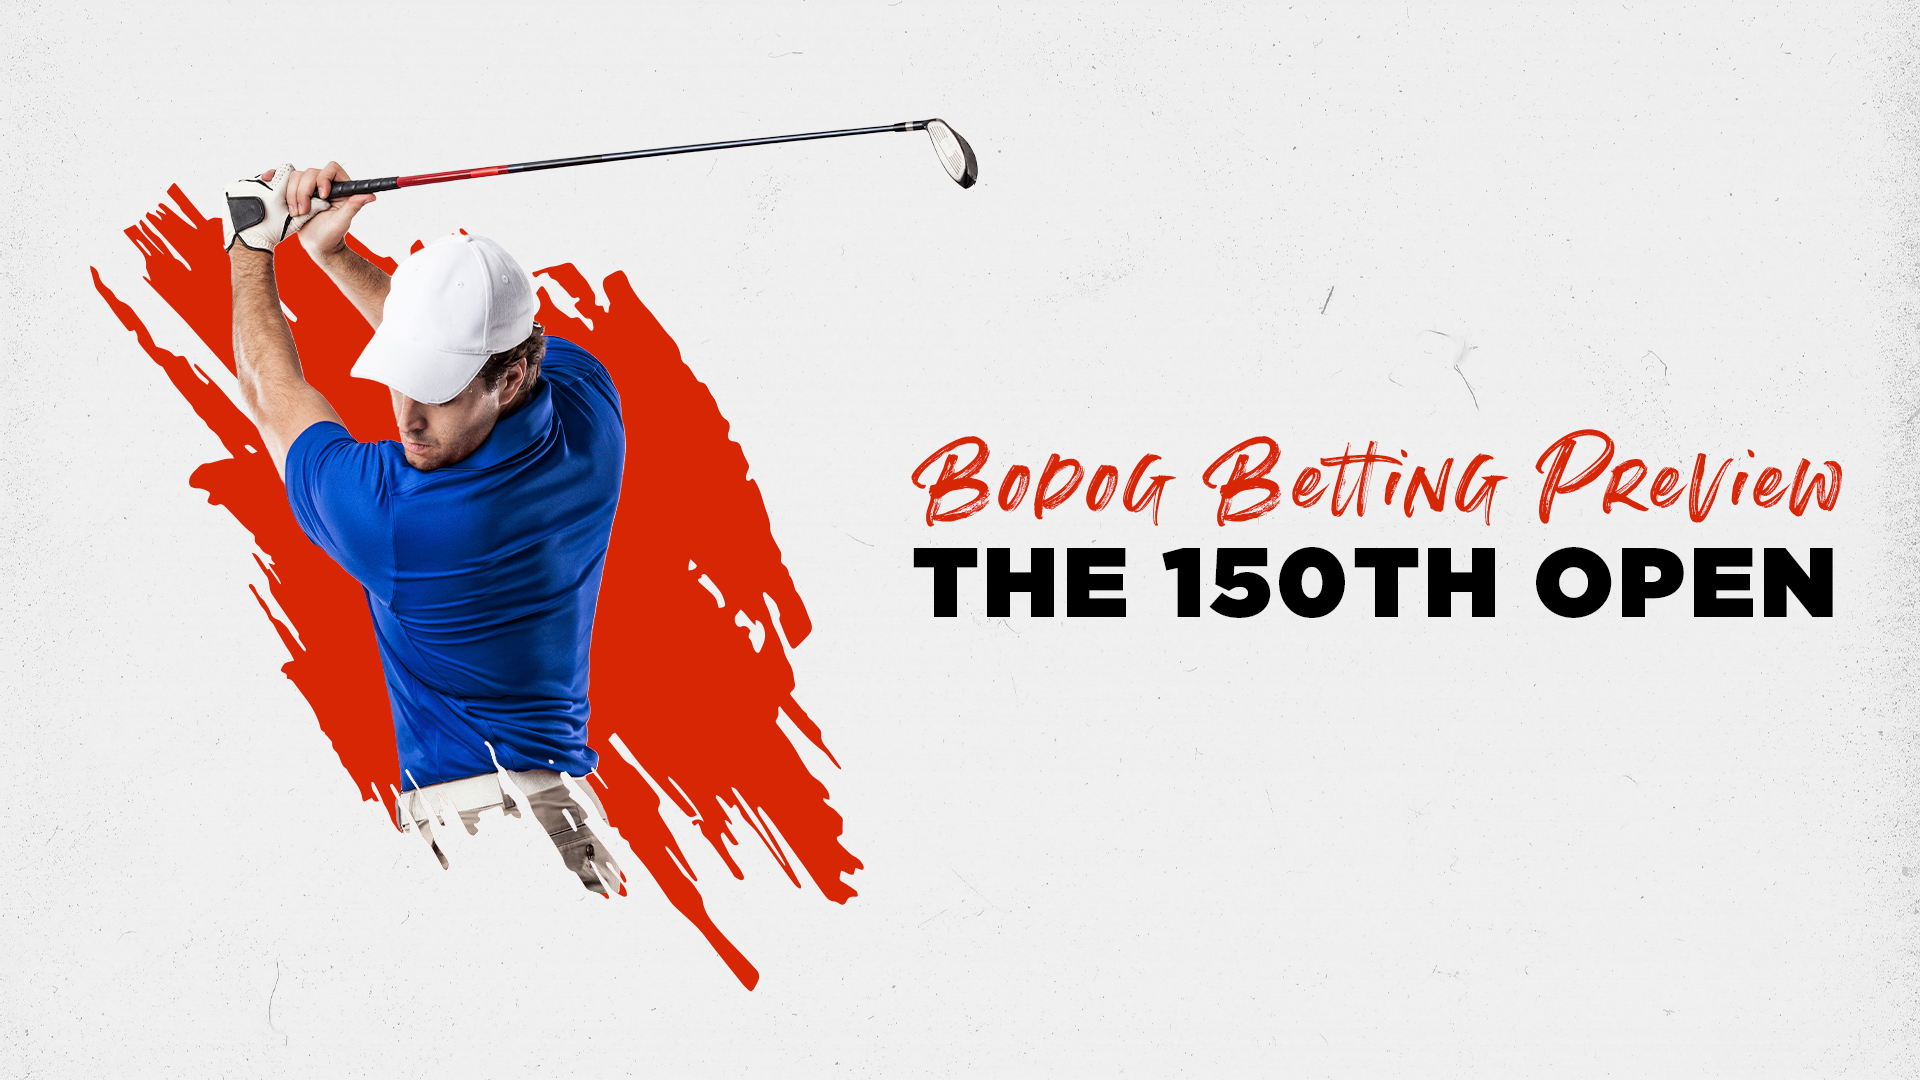 Bodog takes a swing at the 150th Open odds, ready for you to get your bet down fast. Jump in now.